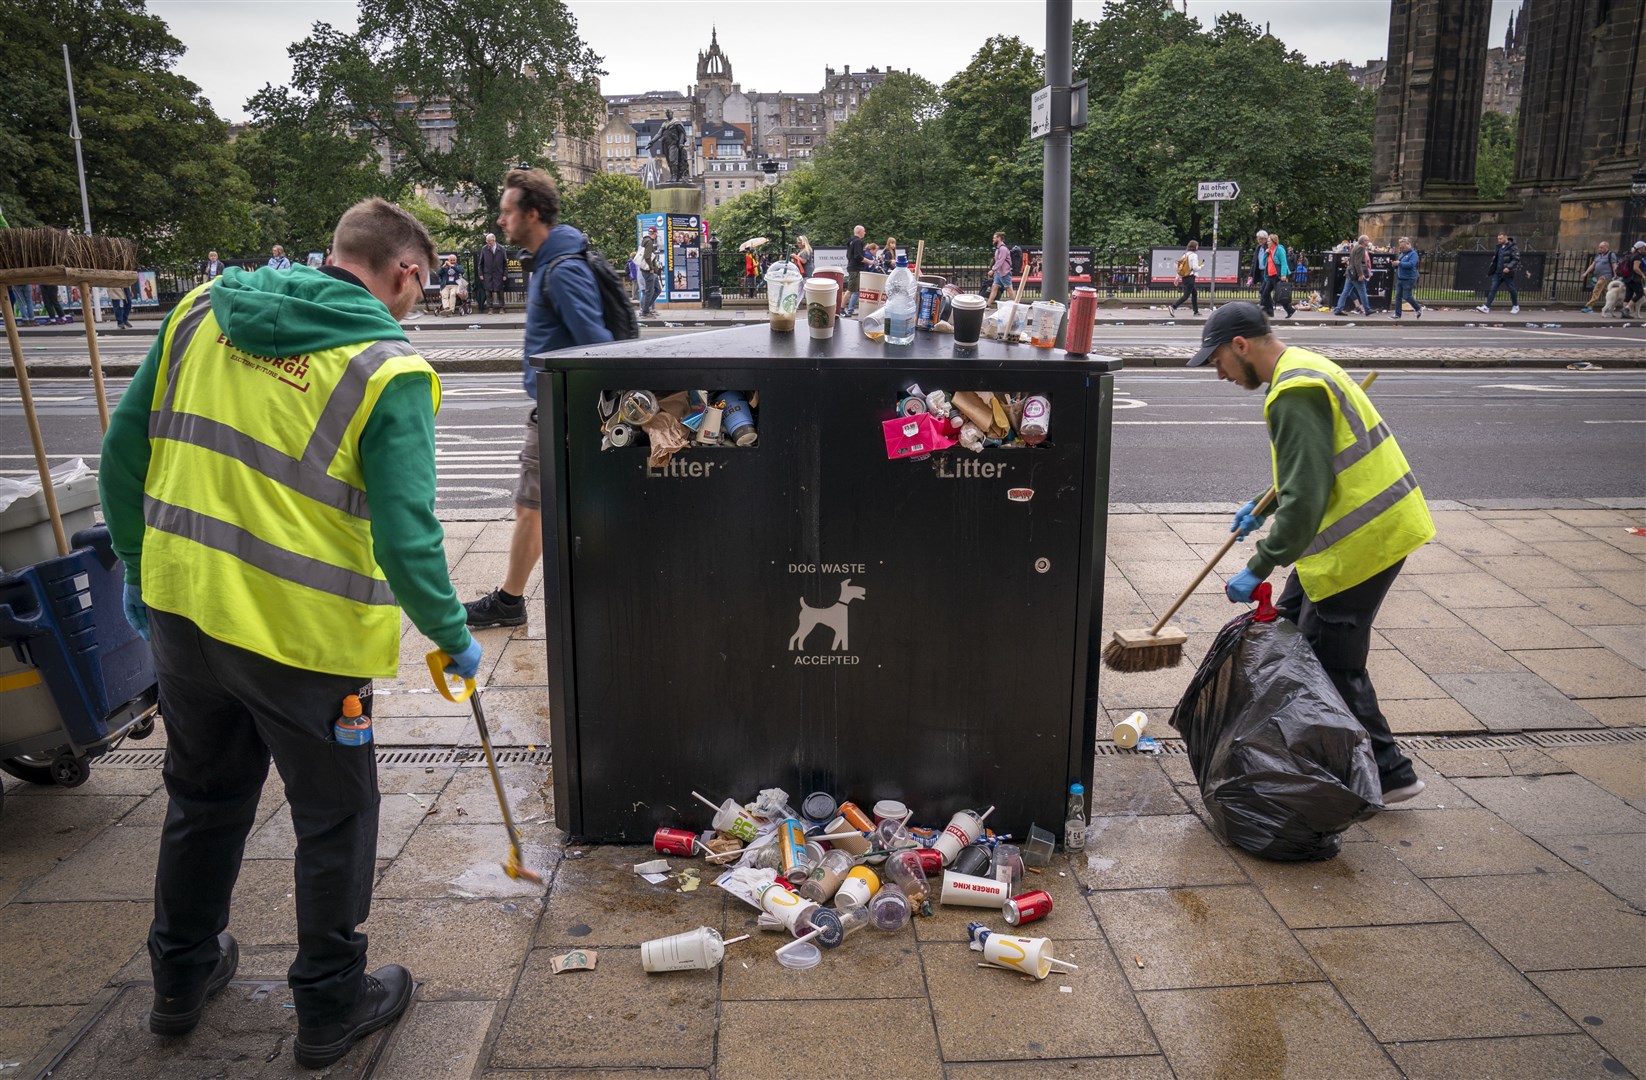 Staff from Essential Edinburgh collect some of the litter from around the bins along Princes Street in Edinburgh (Jane Barlow/PA)